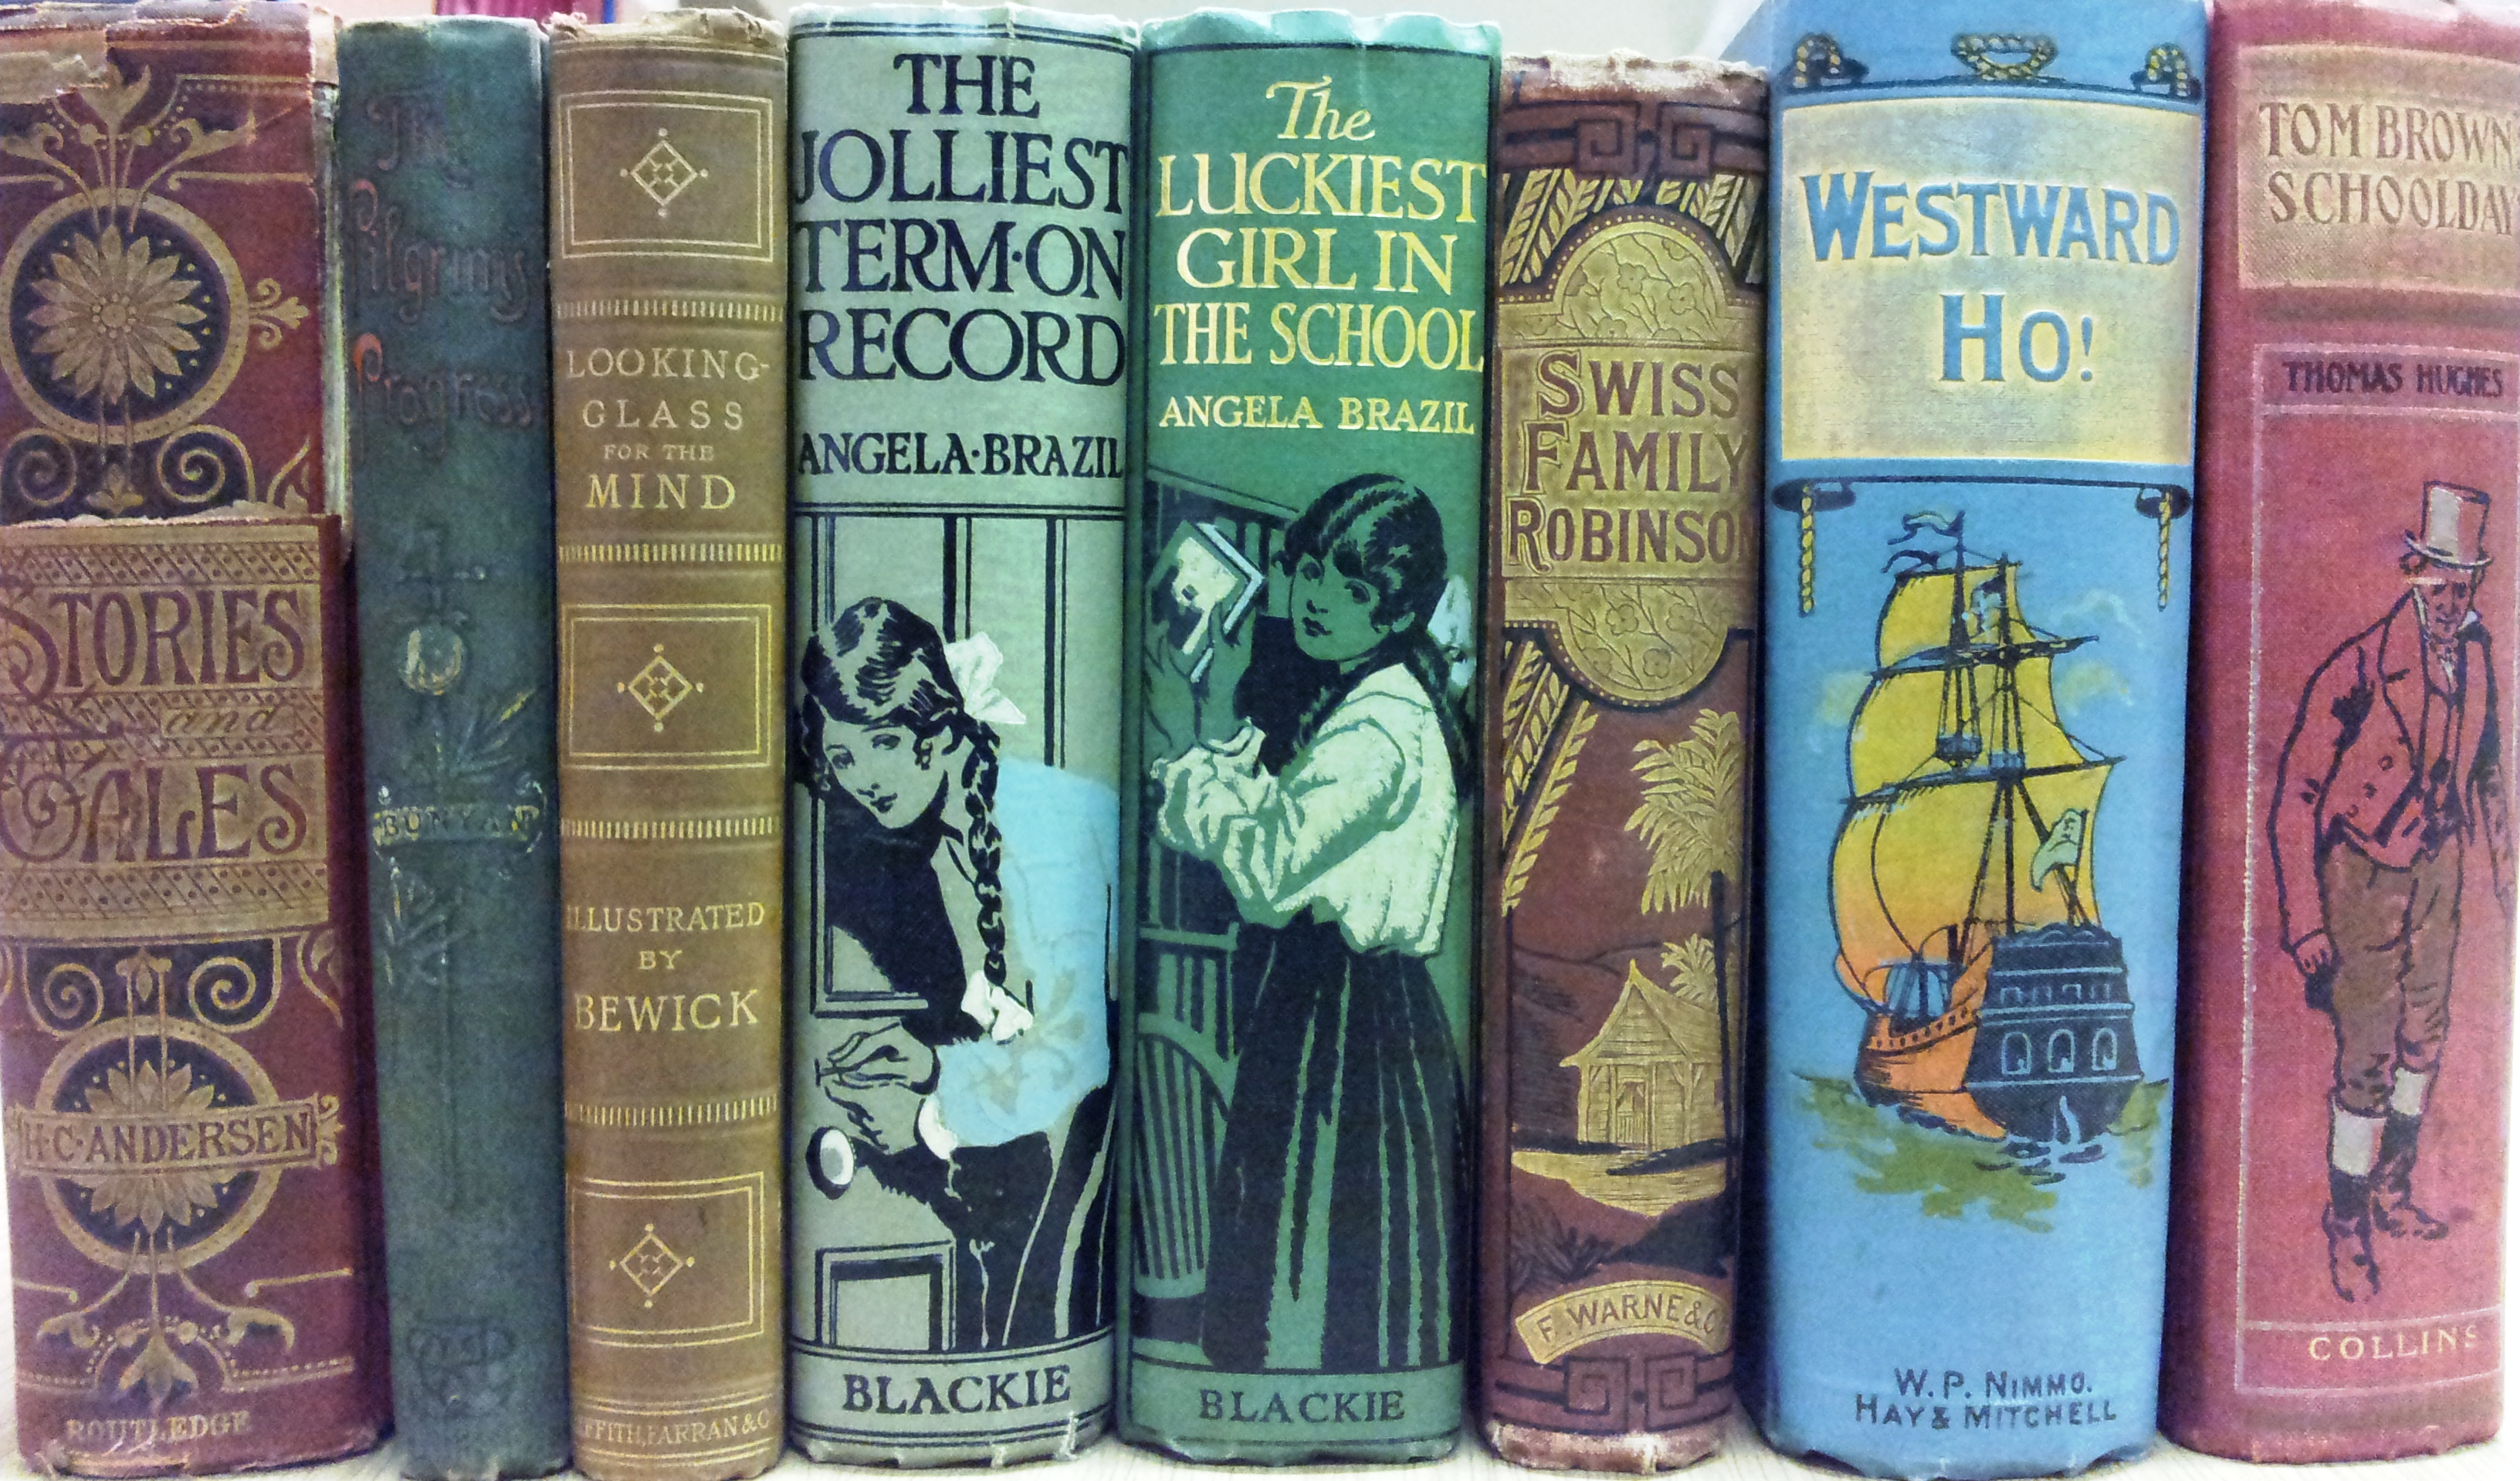 children's literature research collections